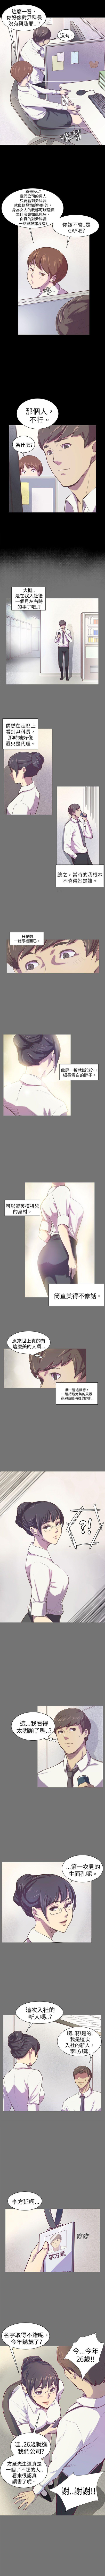 From 斯德哥爾摩症候群 1-40 Compilation - Page 2